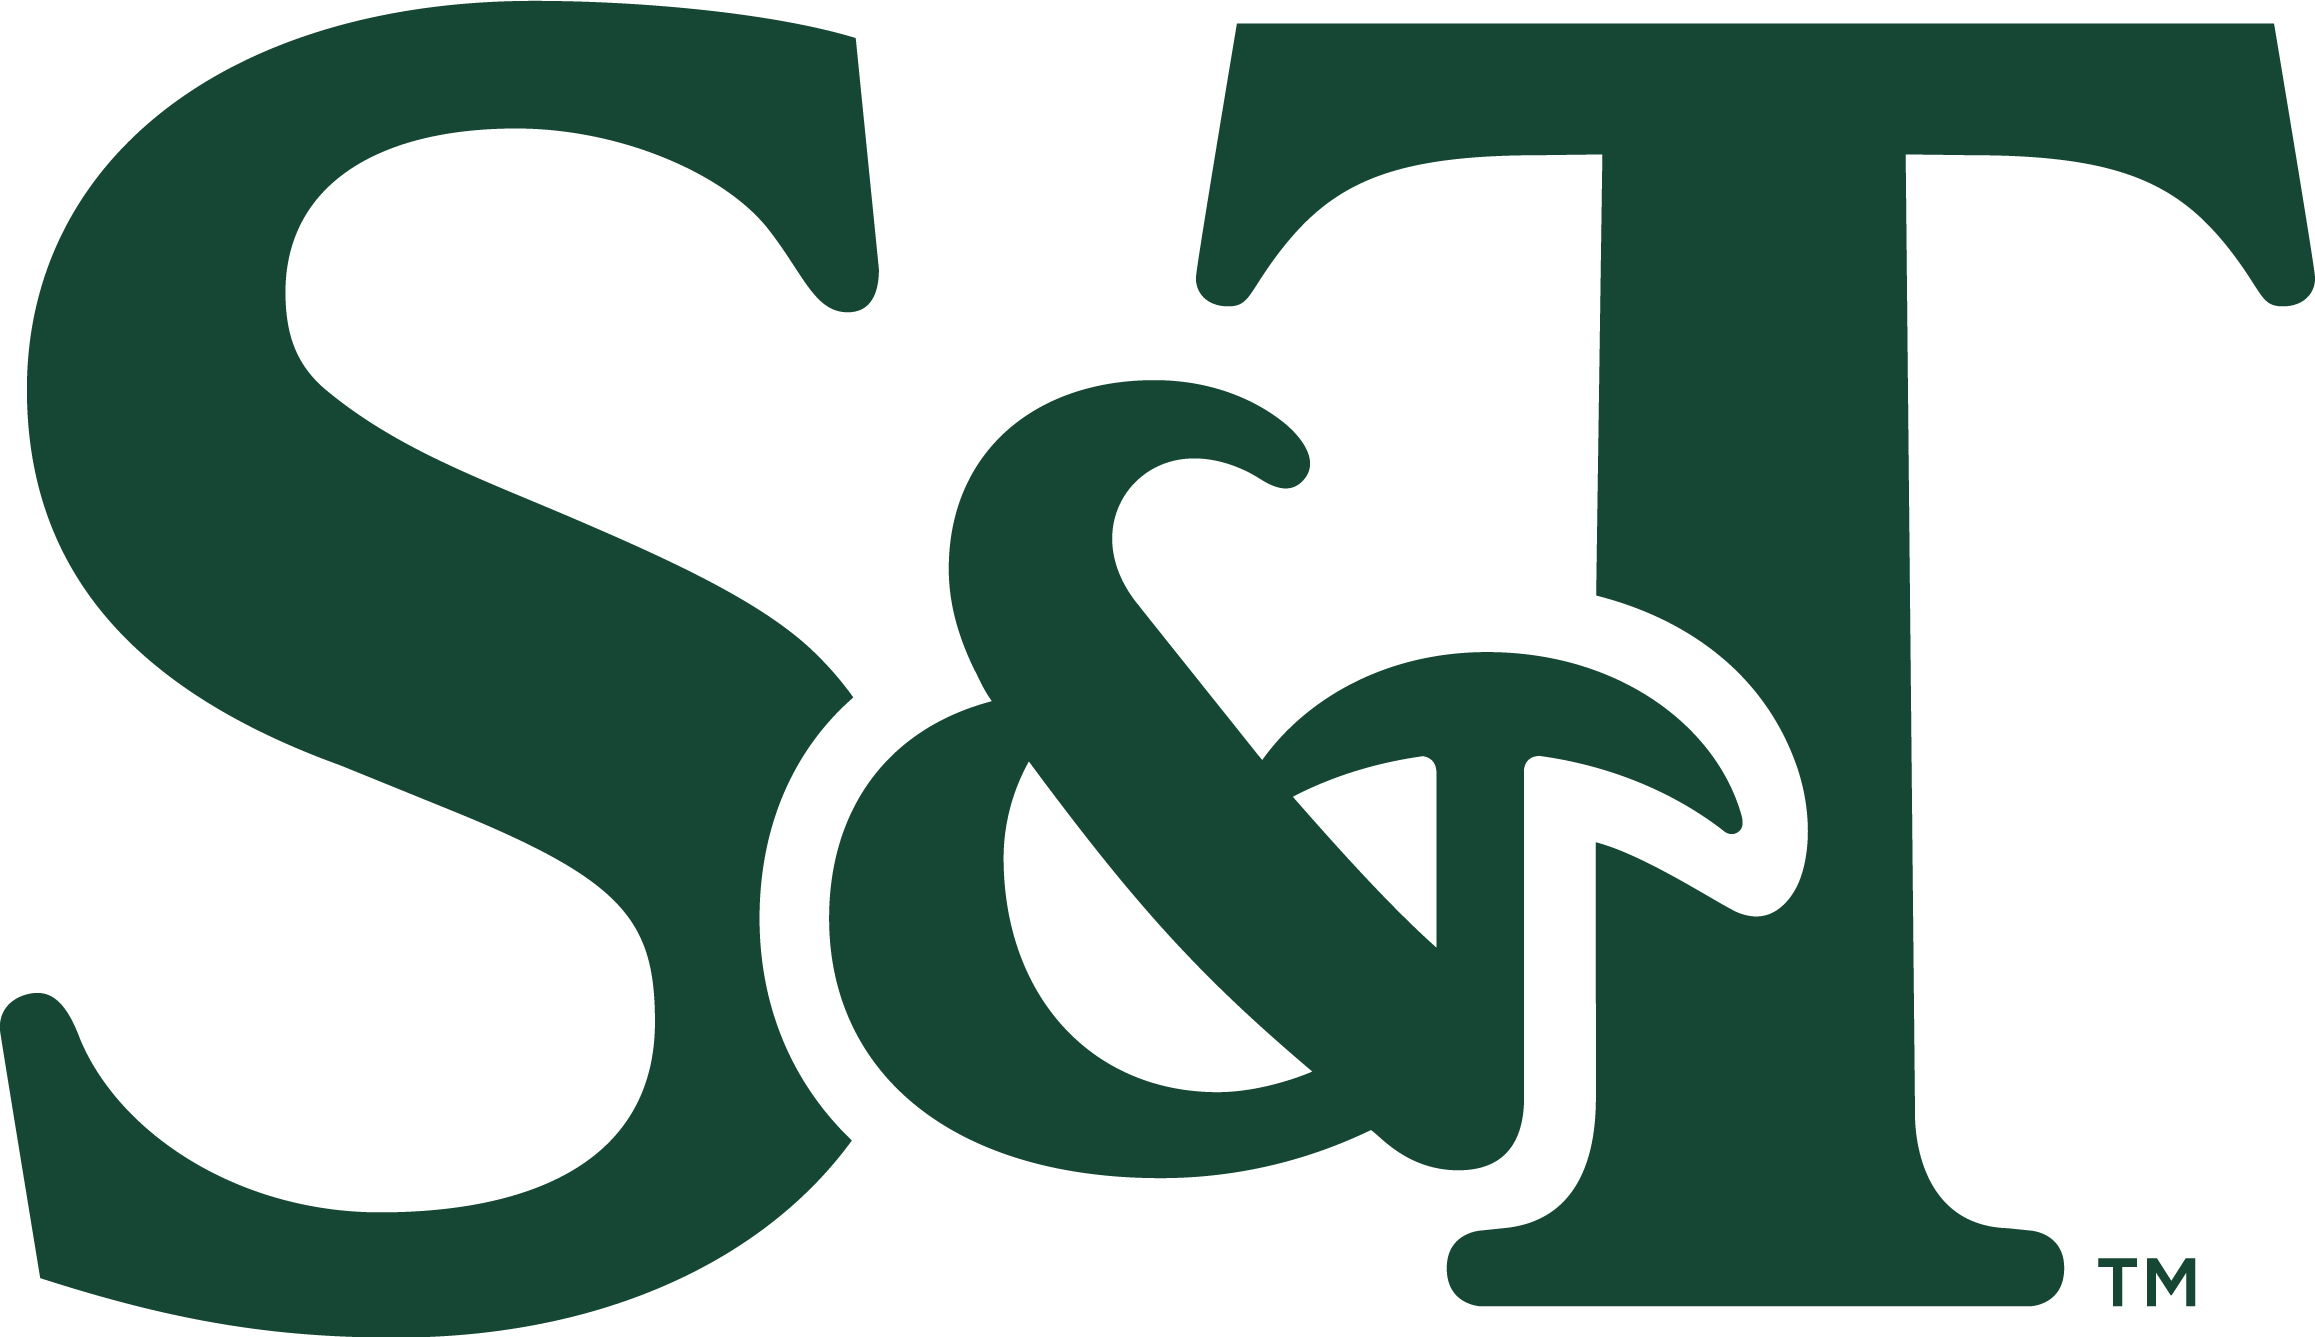 This logo only shows the S&T (in Miner Green)